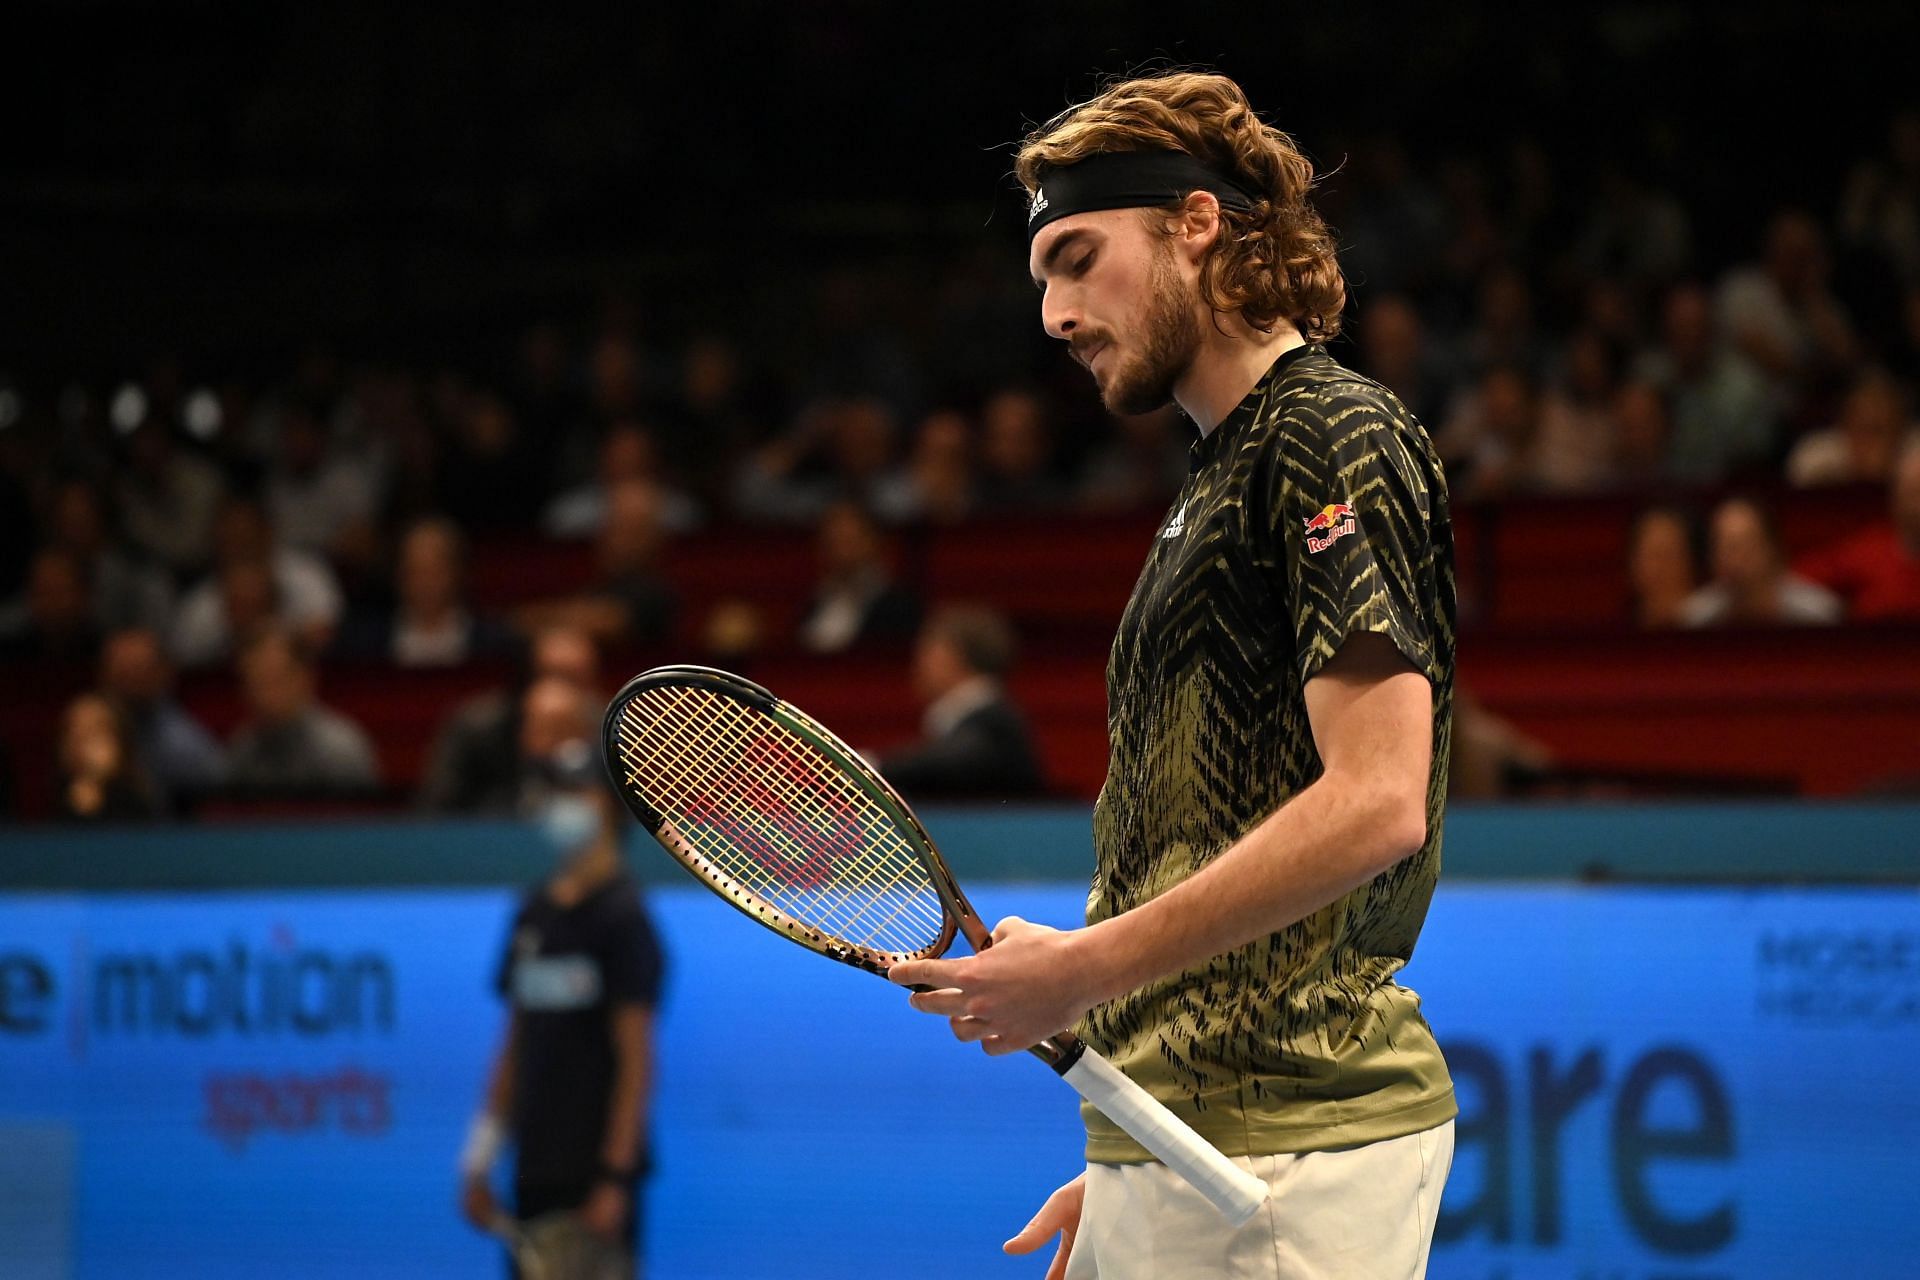 Stefanos Tsitsipas in action at the Erste Bank Open